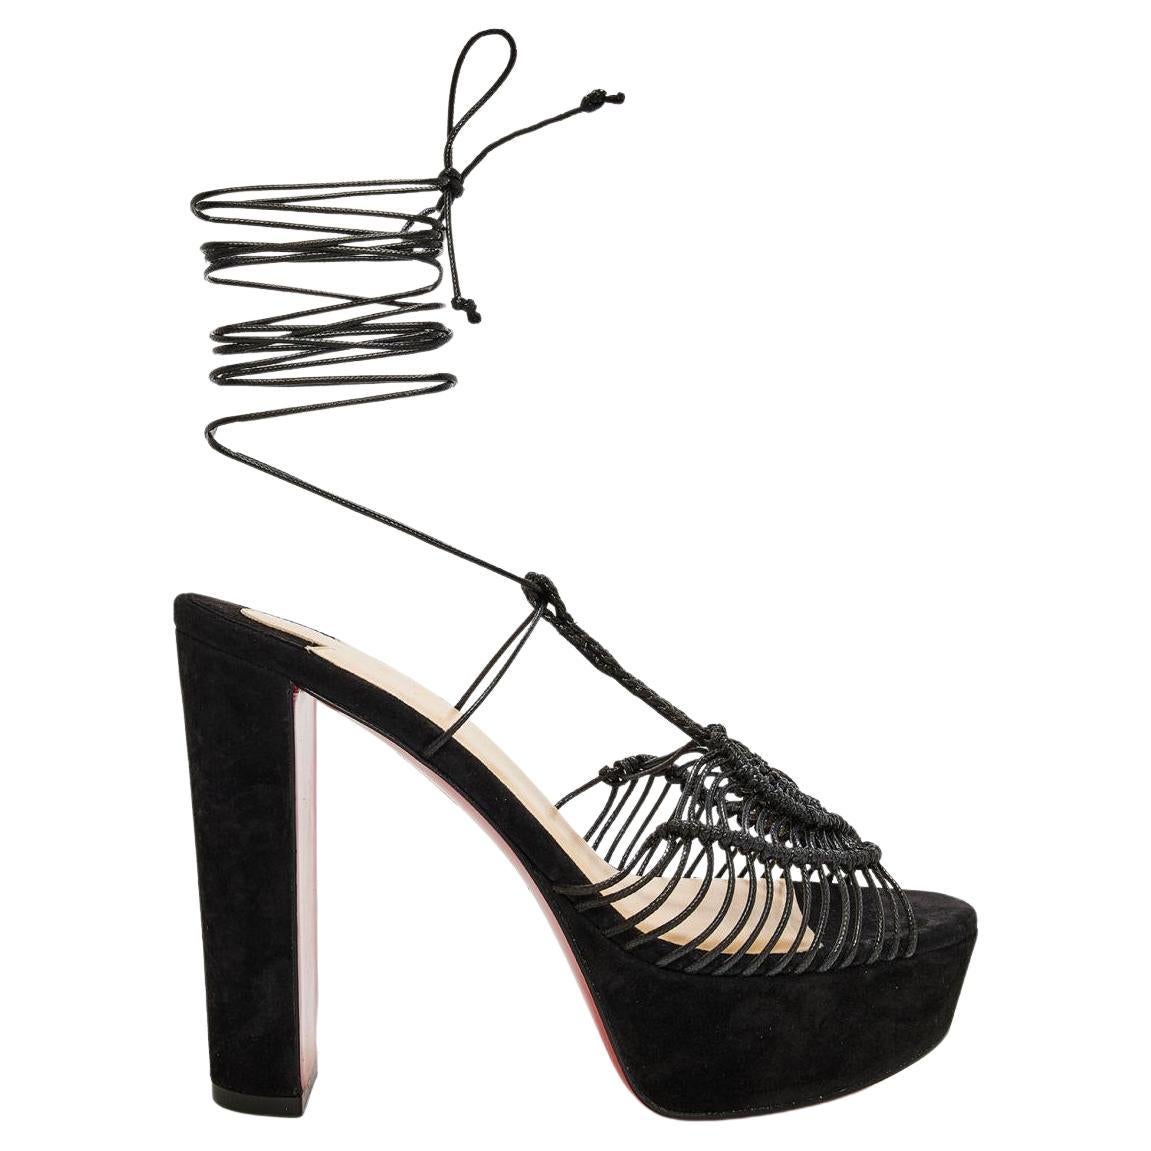 Christian Louboutin's 'Janis in Heels' alta 130 sandals have been made in Italy from hand-woven macramé cotton. The sturdy platform & block heels mean you can wear them comfortably all day and reveal a flash of the iconic red soles as you walk.